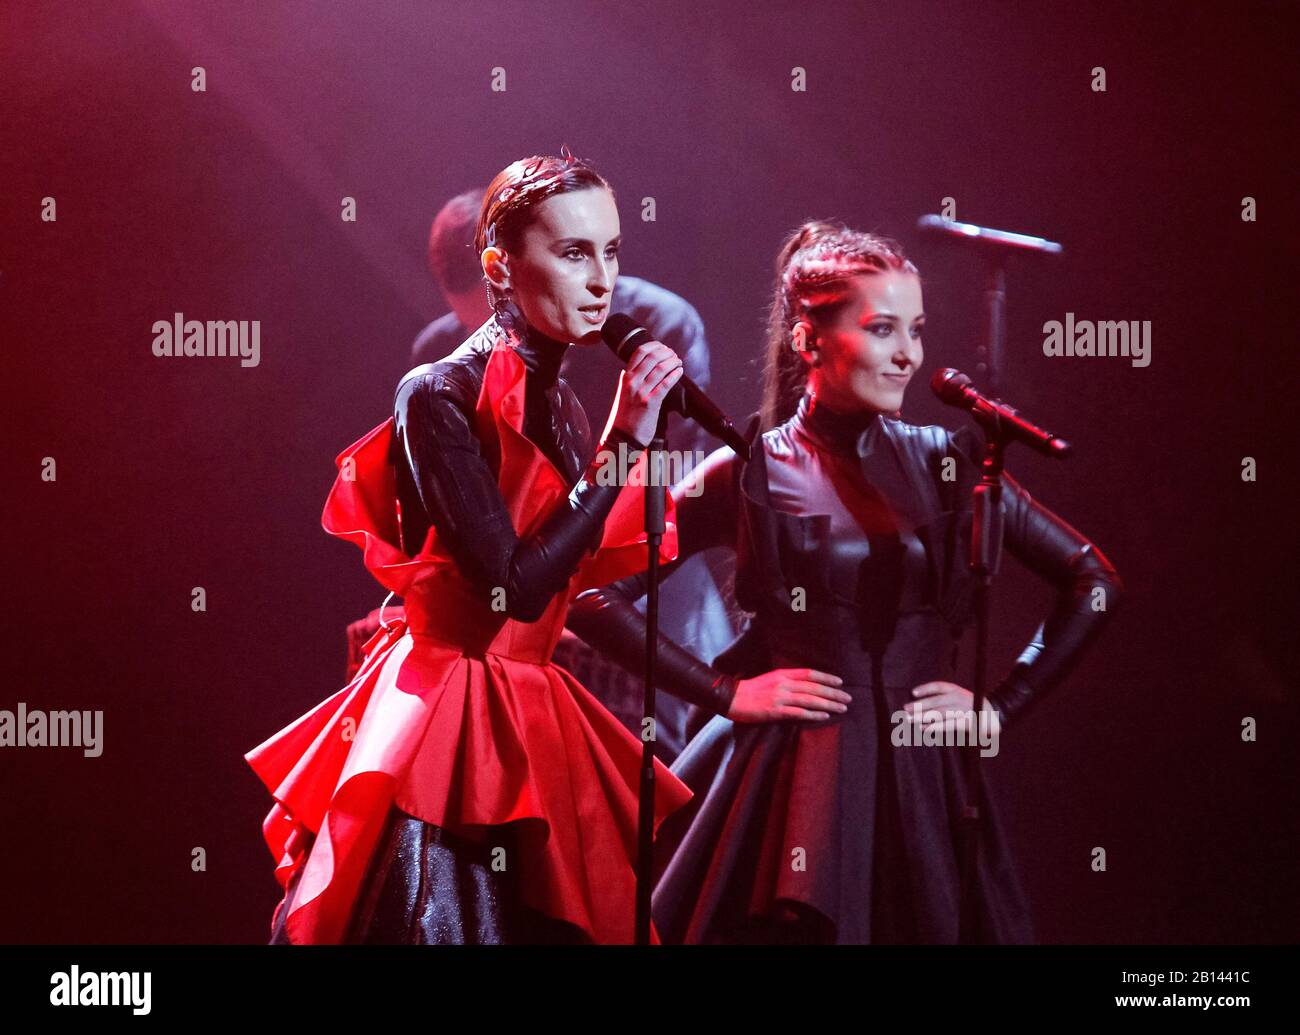 Kiev, Ukraine. 22nd Feb, 2020. Ukrainian band Go A with singer Kateryna Pavlenko (L) perform live on a stage during the 2020 Eurovision Song Contest (ESC) national selection show in Kiev.Ukrainian band Go A with song Solovey will represent Ukraine at the 2020 Eurovision Song Contest (ESC) in Netherlands. The 65th anniversary Eurovision song contest will be held in Rotterdam (Netherlands) from May 12 to May 16, 2020. Ukraine, which missed the competition last year, intends to return to participation in 2020. Credit: SOPA Images Limited/Alamy Live News Stock Photo